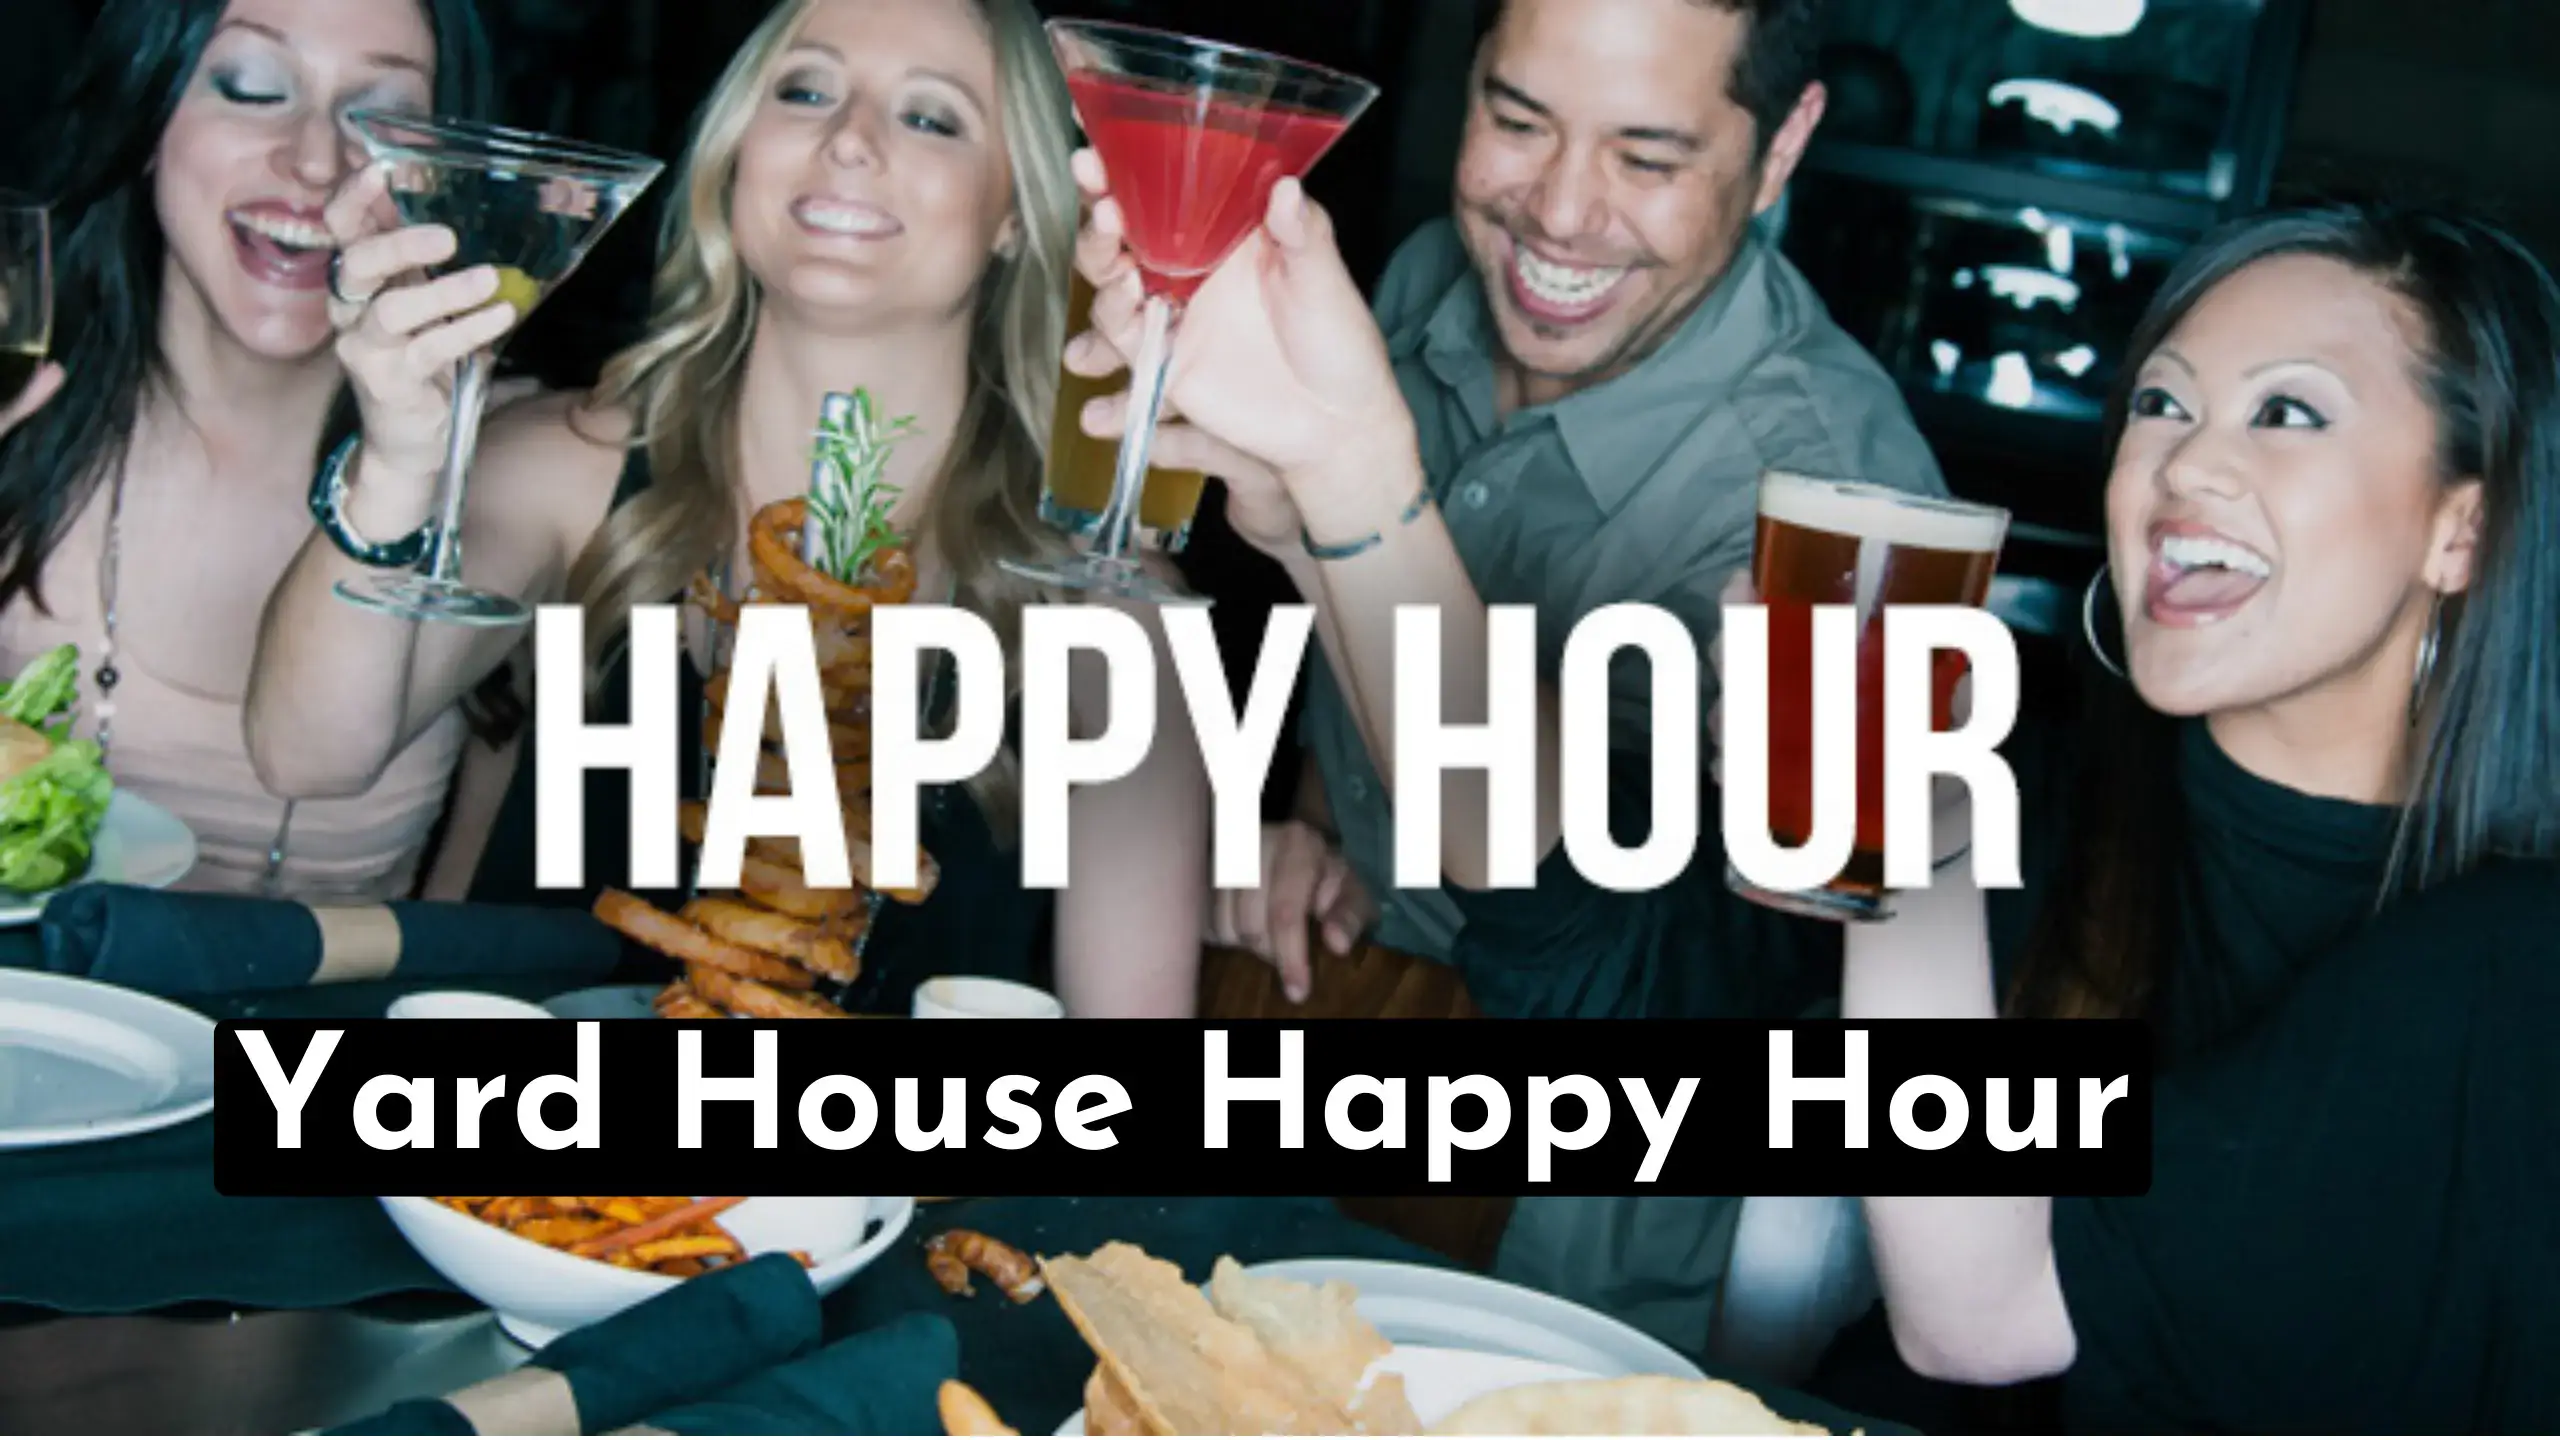 Are You Searching For Yard House Happy Hour Near You | Then Read This Comprehensive Guide To Discover Yard House Happy Hour Menu & Yard House Happy Hour Times.